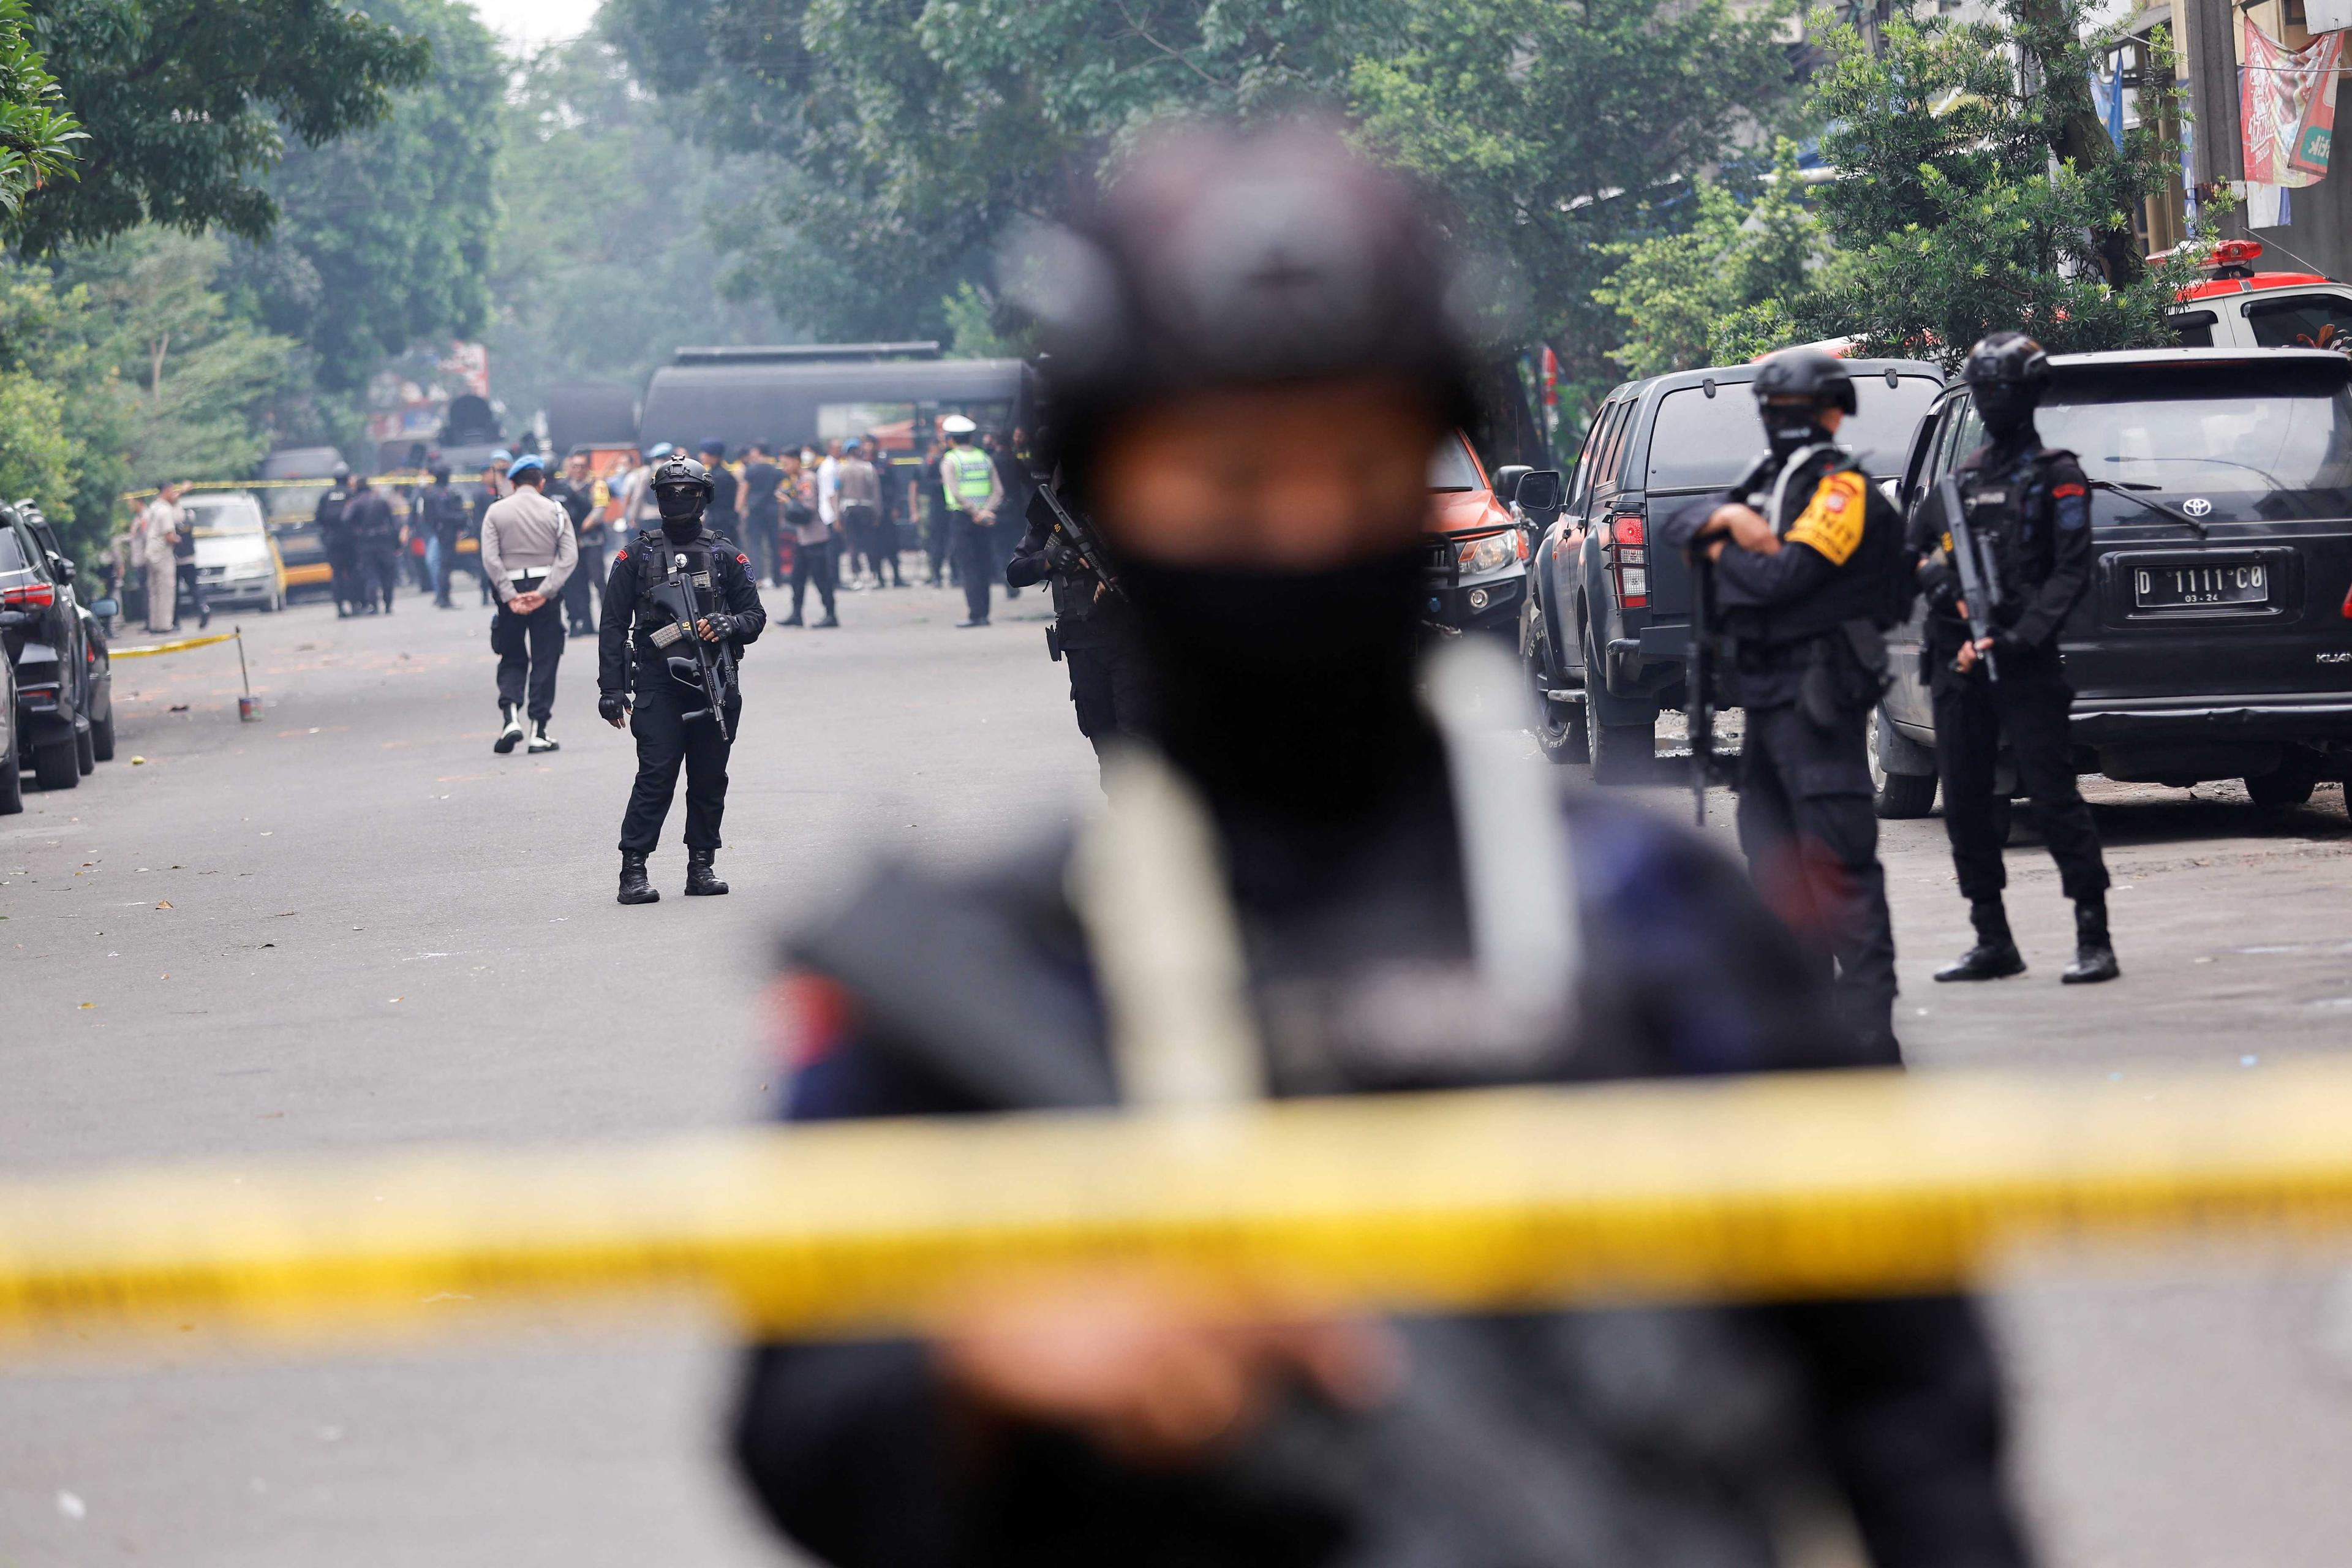 Armed police officers stand guard following a blast at a district police station, that according to authorities was a suspected suicide bombing, in Bandung, West Java province, Indonesia, Dec 7. Photo: Reuters